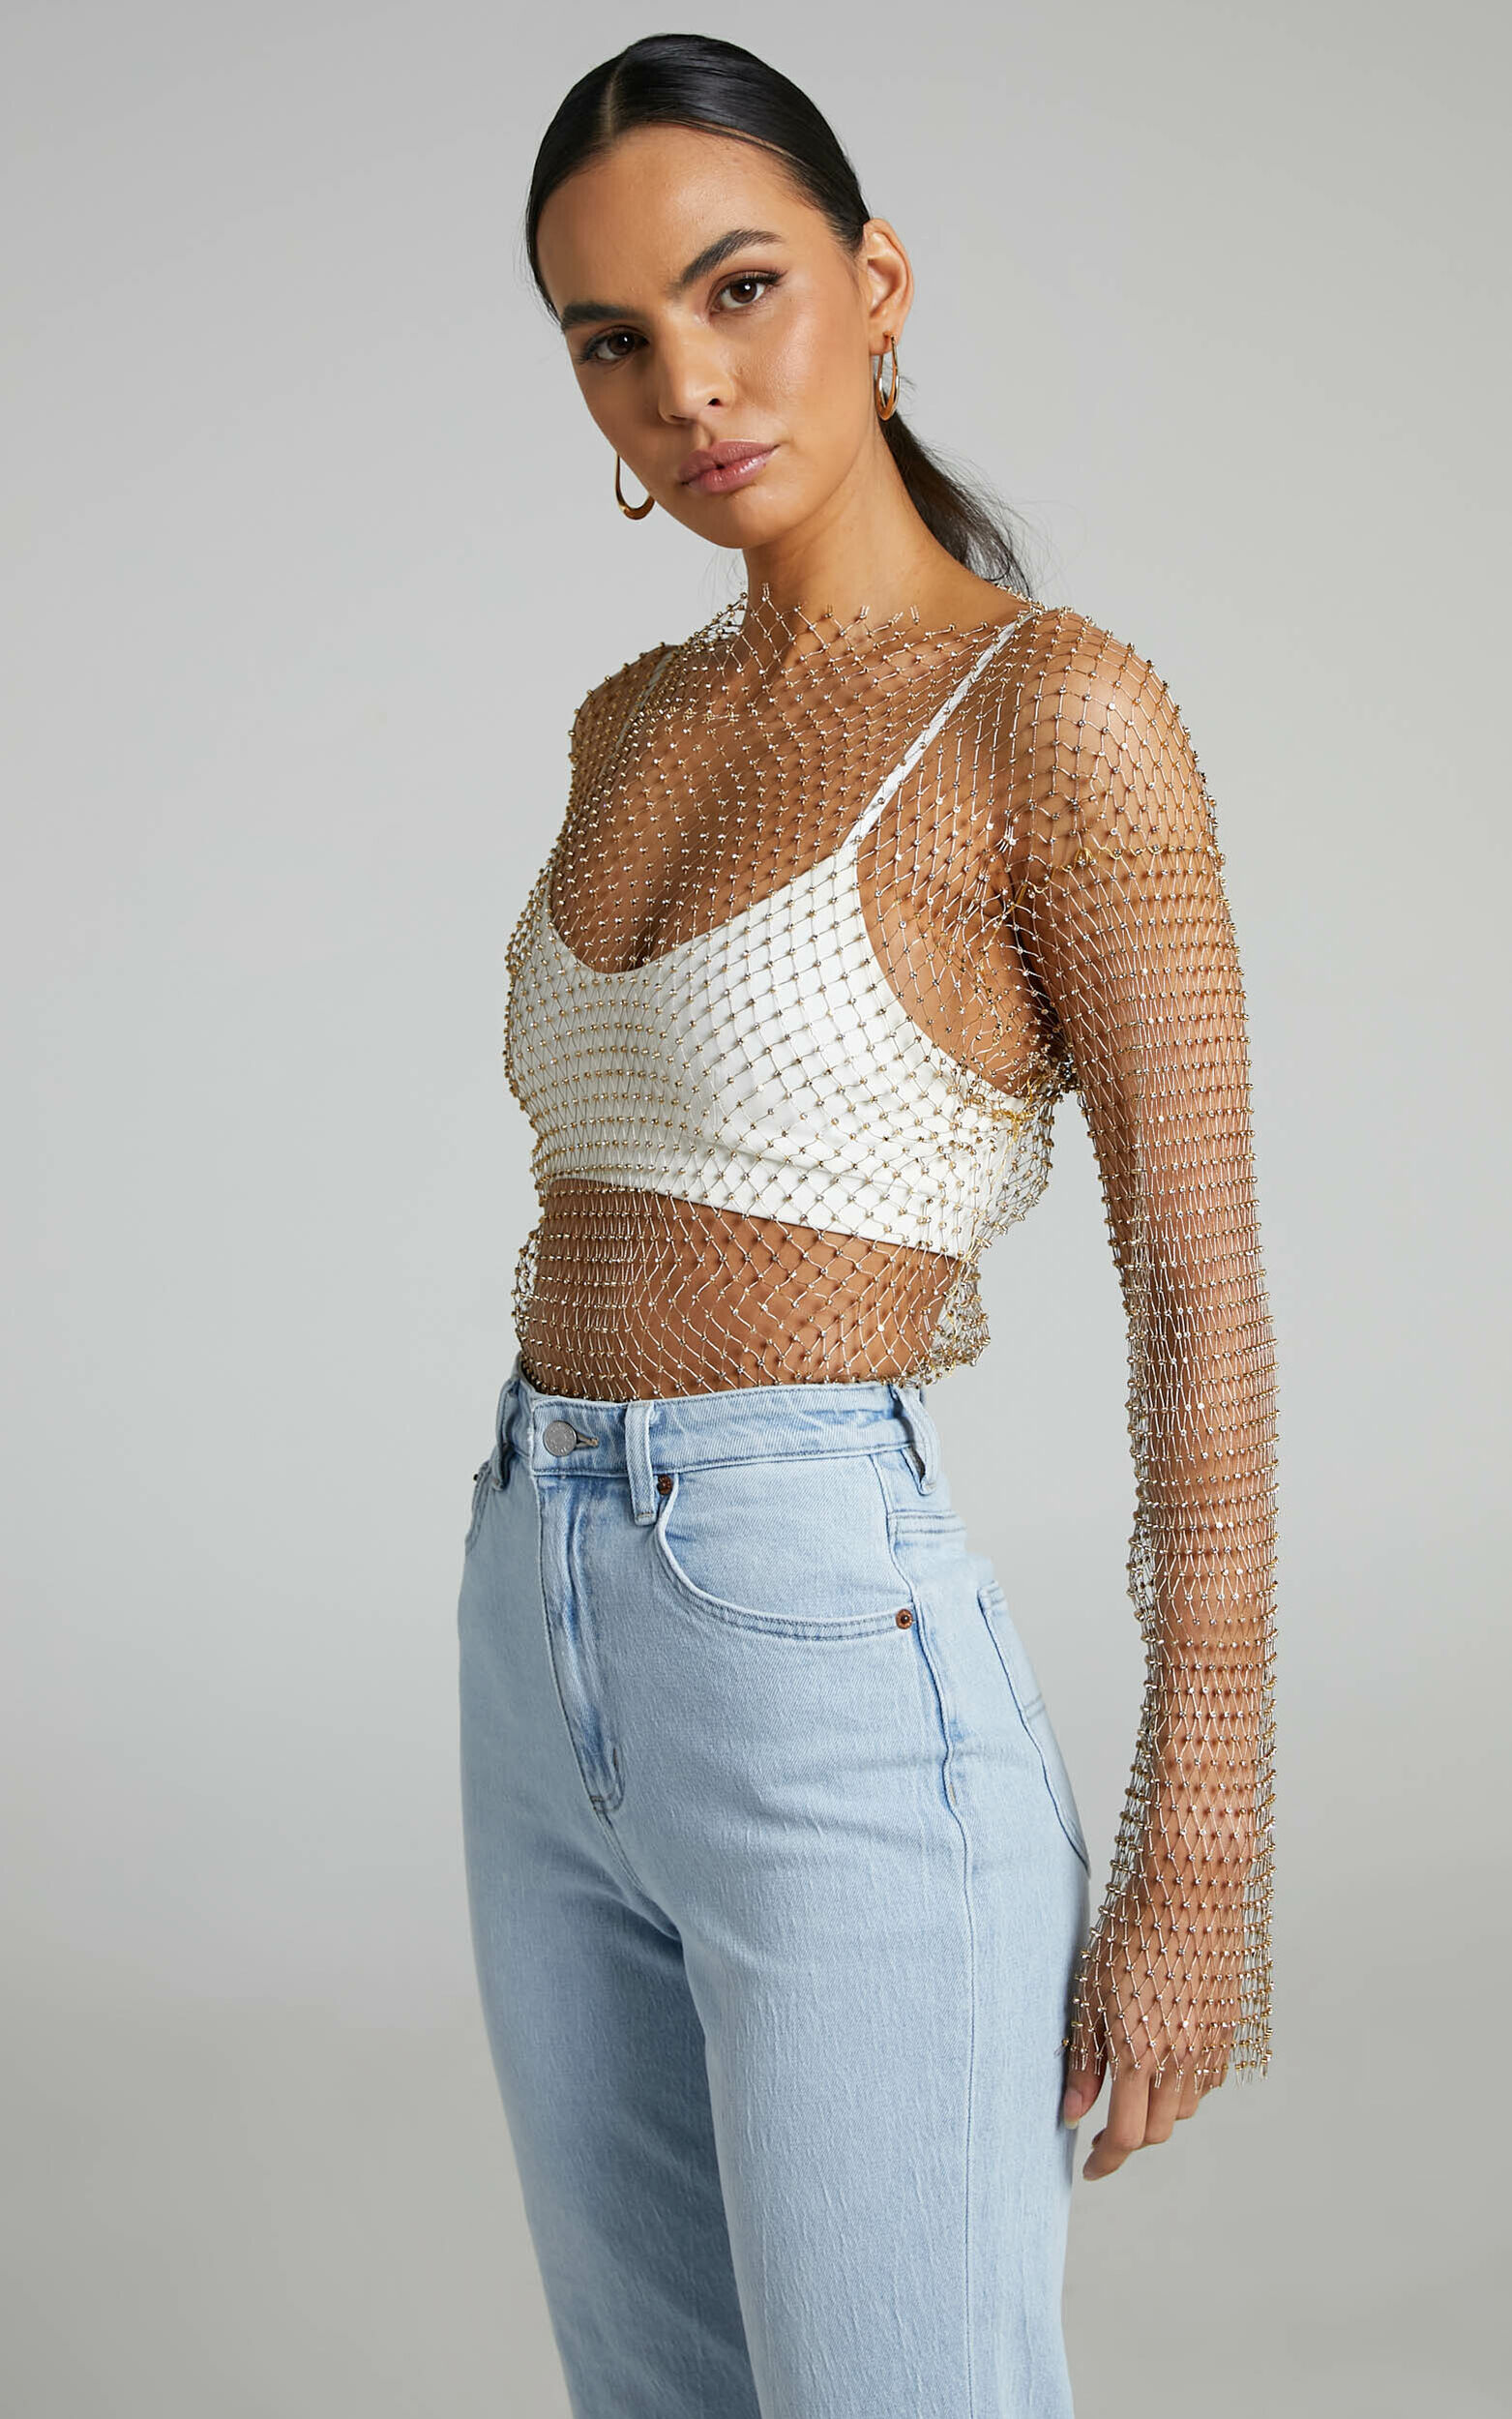 Charess Top - Diamante Mesh Long Sleeve Top in Gold